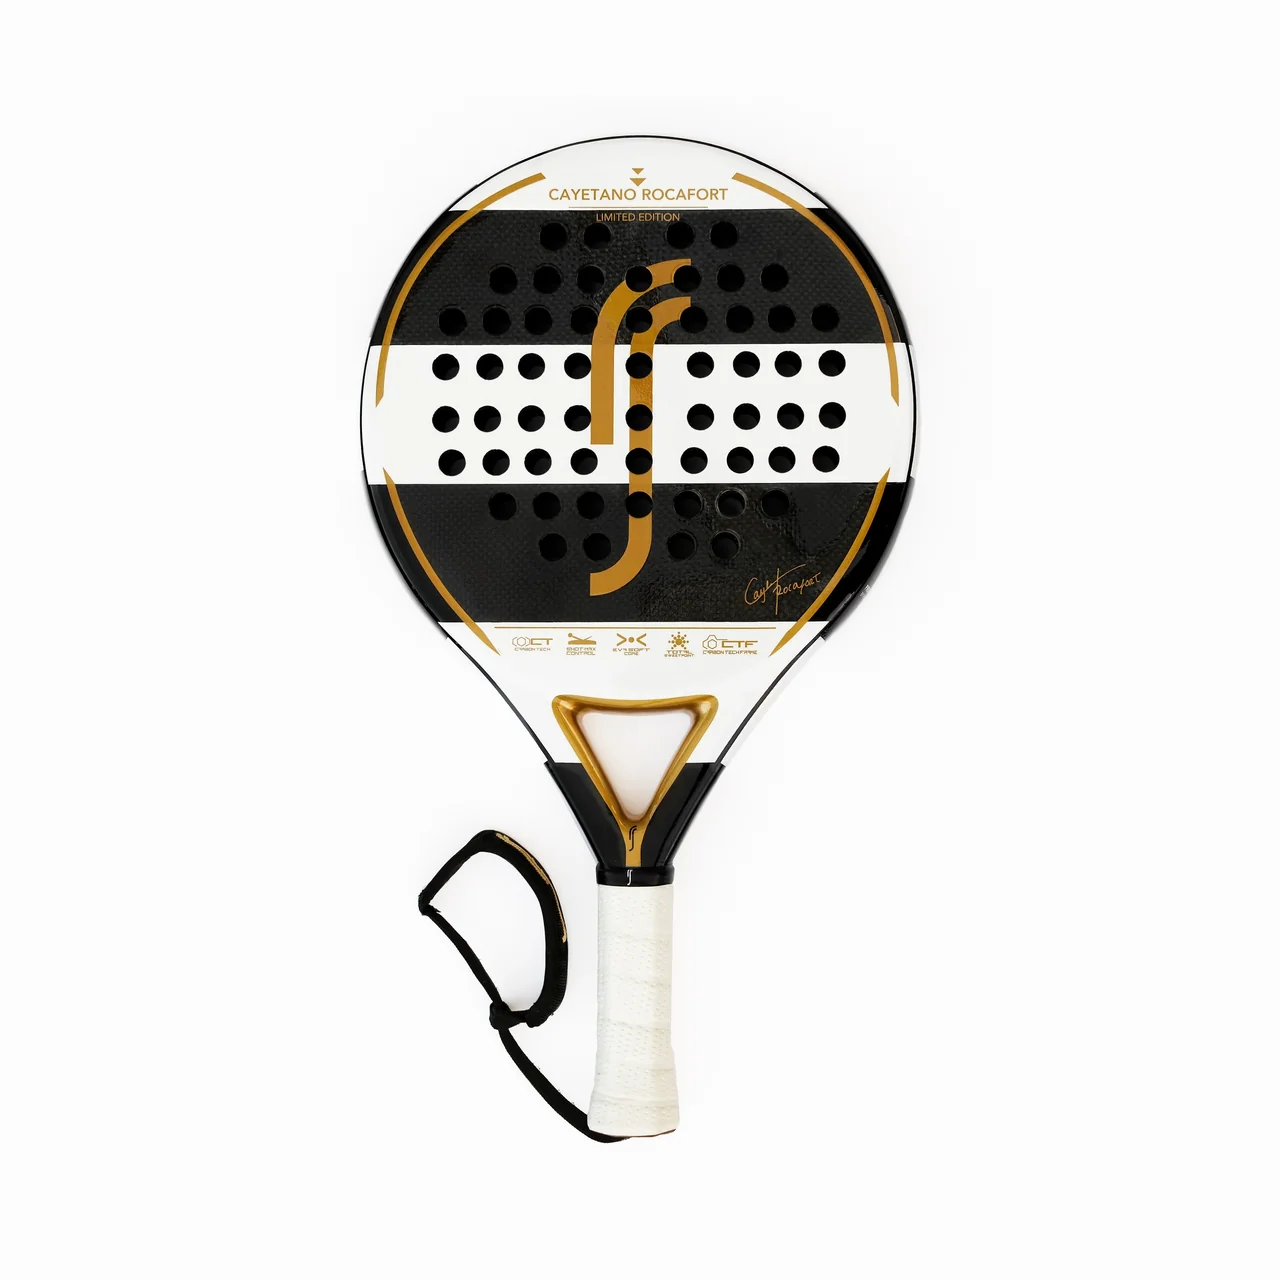 RS Cayetano Rocafort Limited Edition White/Black/Gold